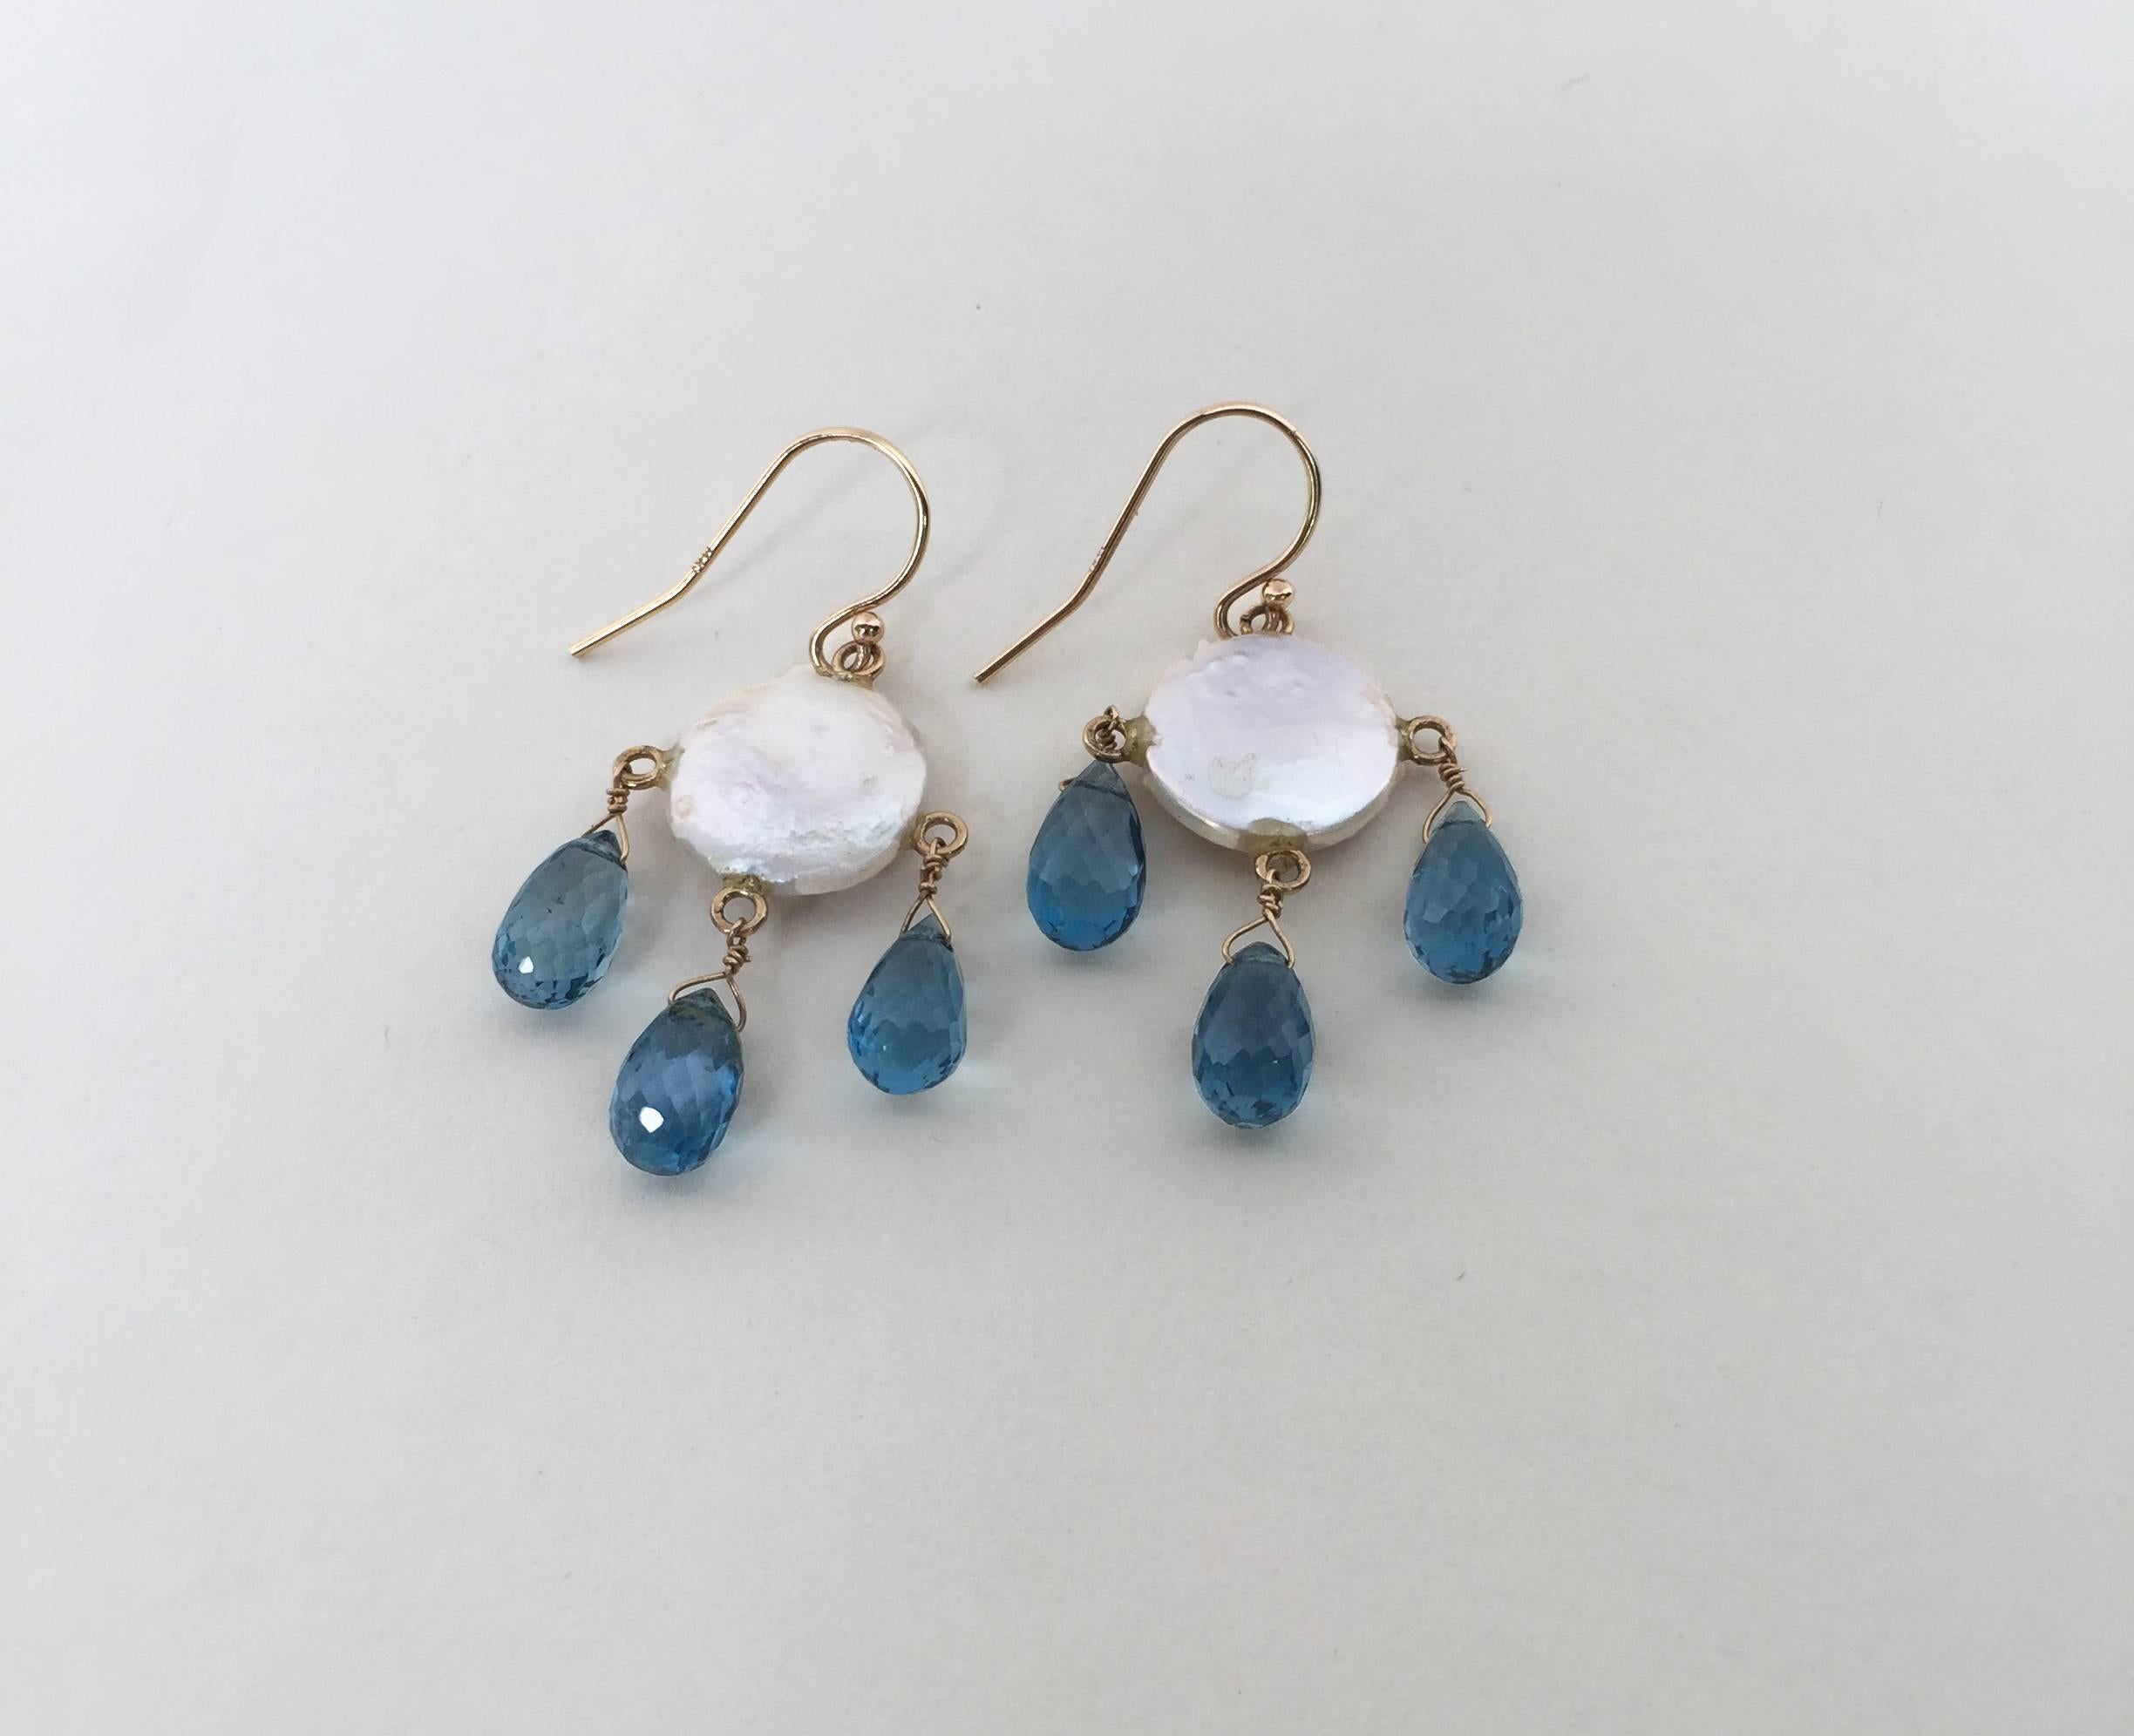 These whimsical earrings are highlighted by the iridescent colors of the coin pearl and London blue topaz drop beads. Running through the design is 14k yellow gold wiring completed with a hook of the same material. They are 1.5 inches long dangling